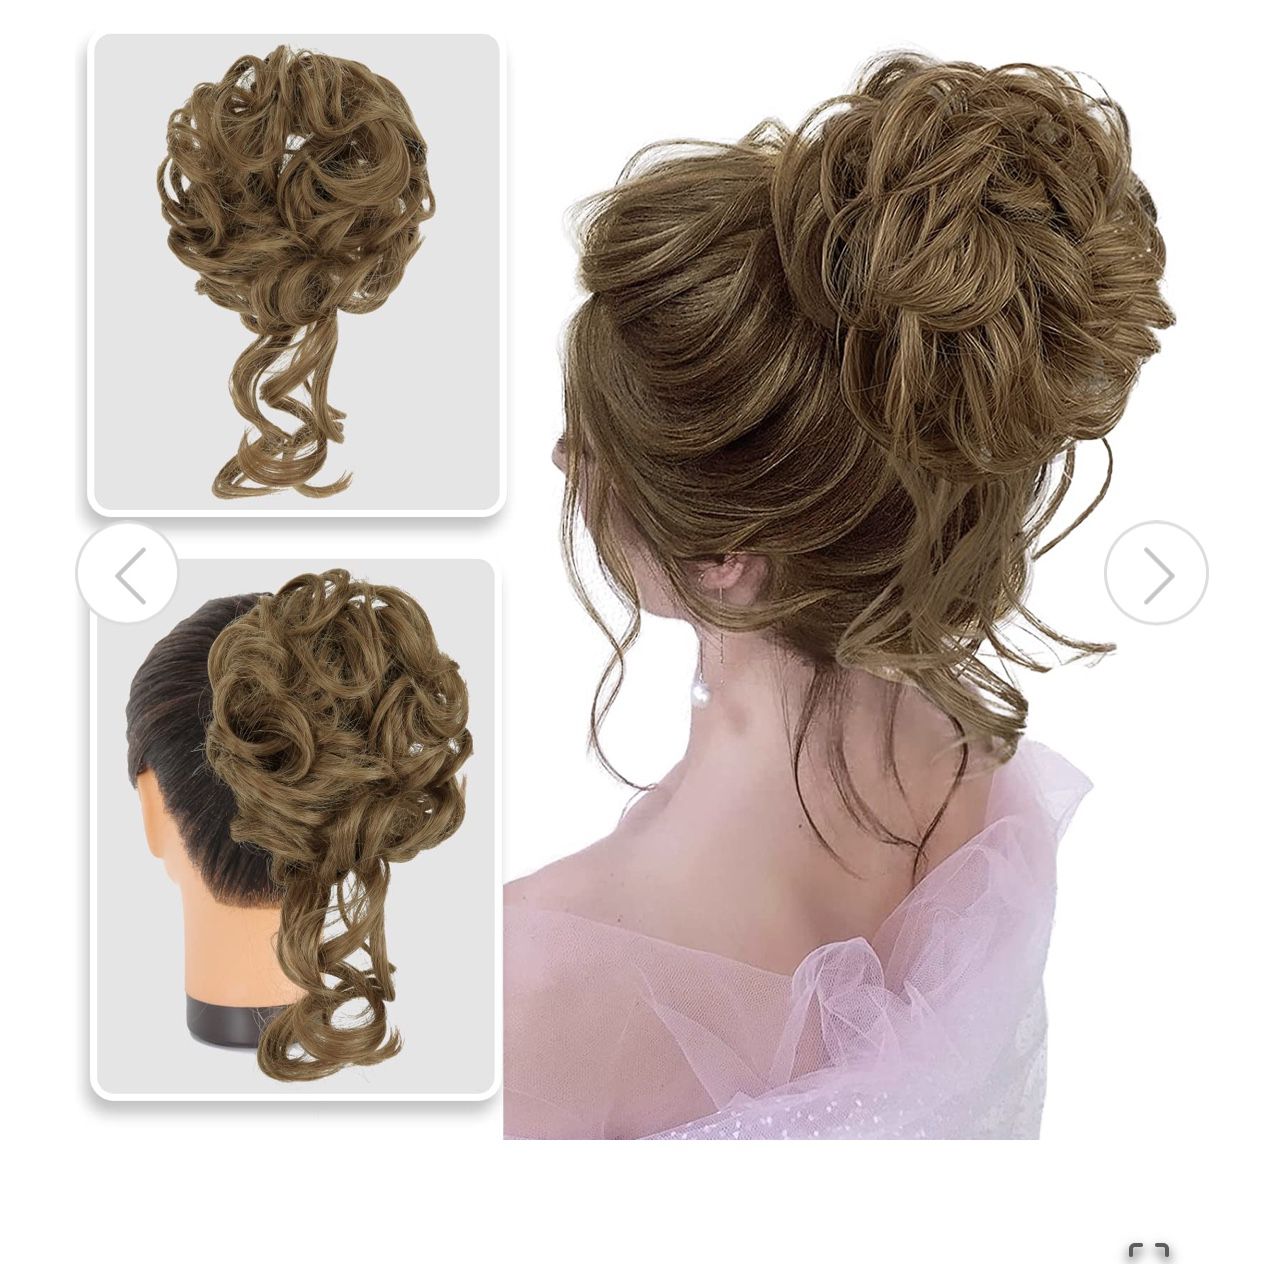 Messy Bun Hair Piece Synthetic Messy Hair Buns Tousled Updo Hair Bun Extensions Wavy Hair Wrap Ponytail Hairpieces with Fringe for Women Girls(Brown a